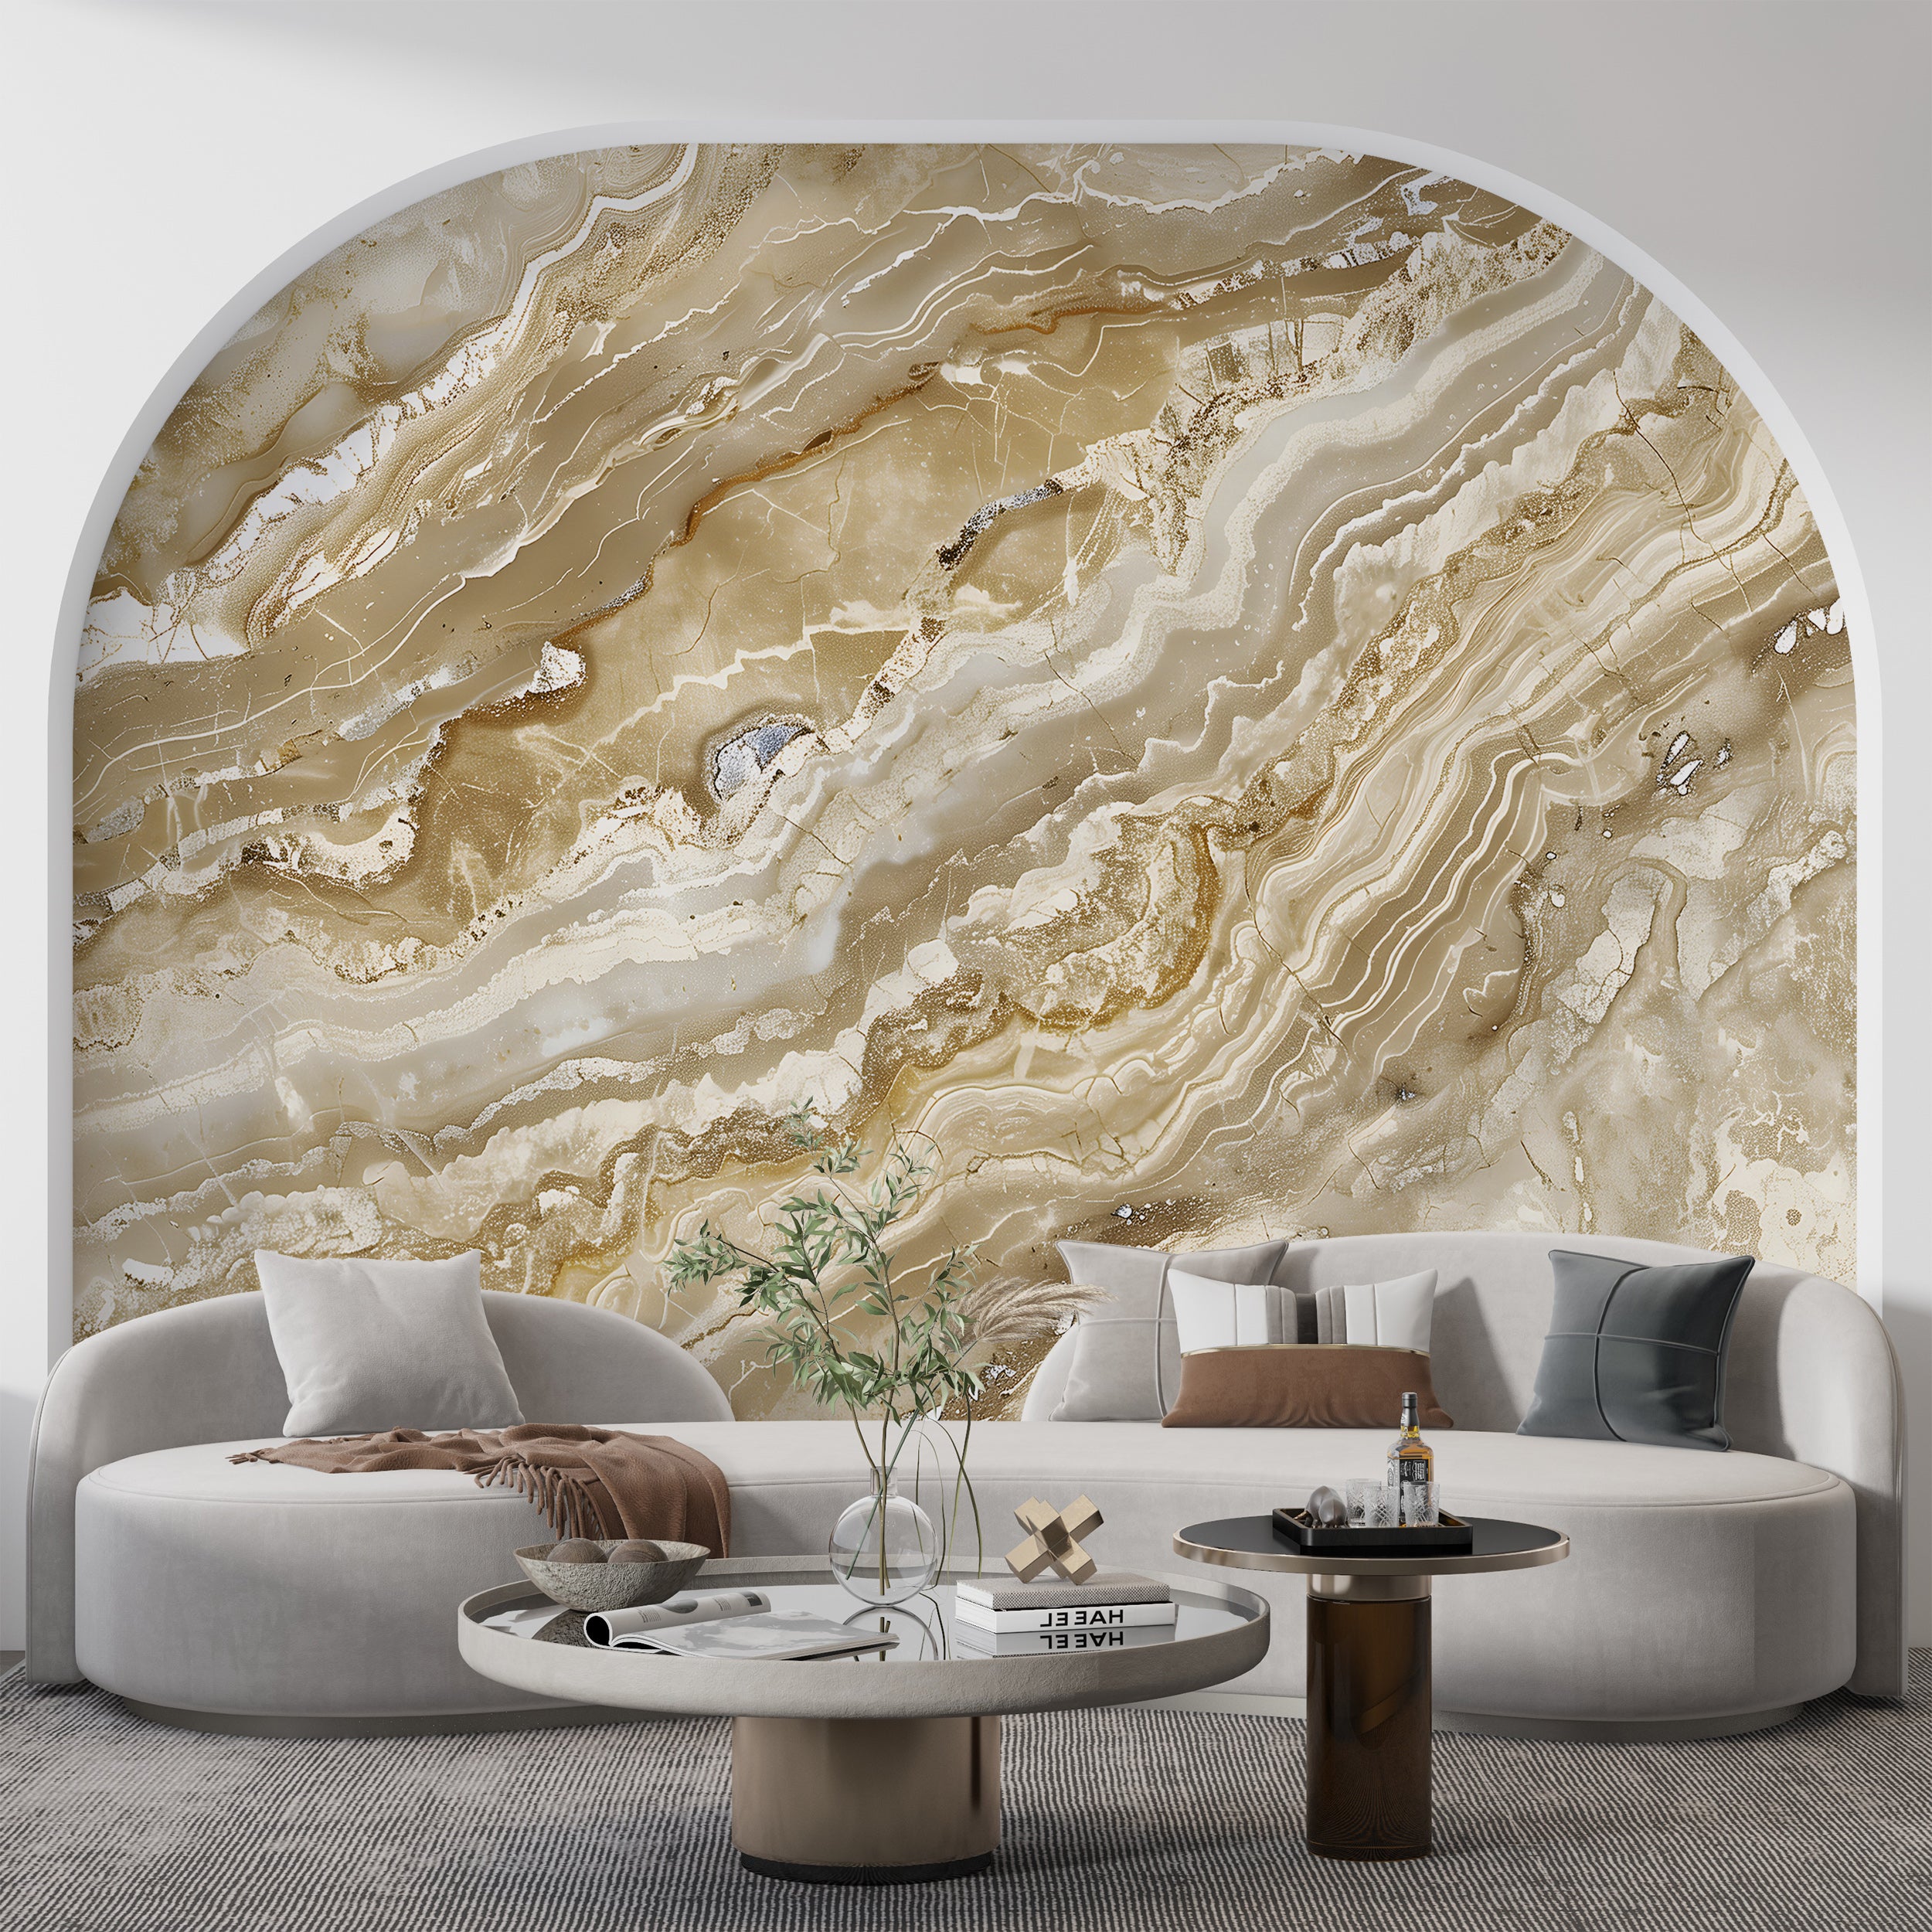 Marble Wall Mural, Removable Marble Wallpaper, Detailed Marble Texture Accent Wall Decor, Peel and Stick Beige Stone Wall Art, Custom Size